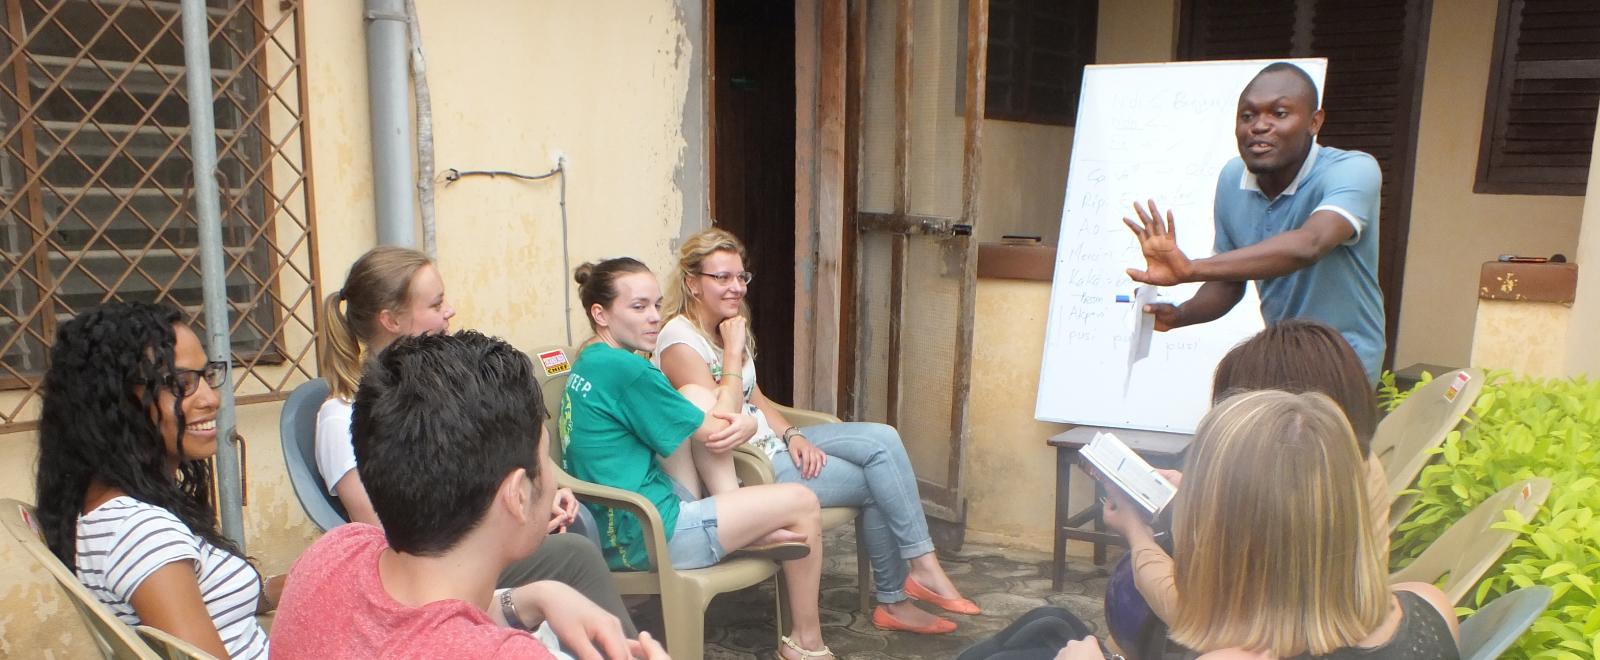 Volunteers receive a language lesson as an add on to their project